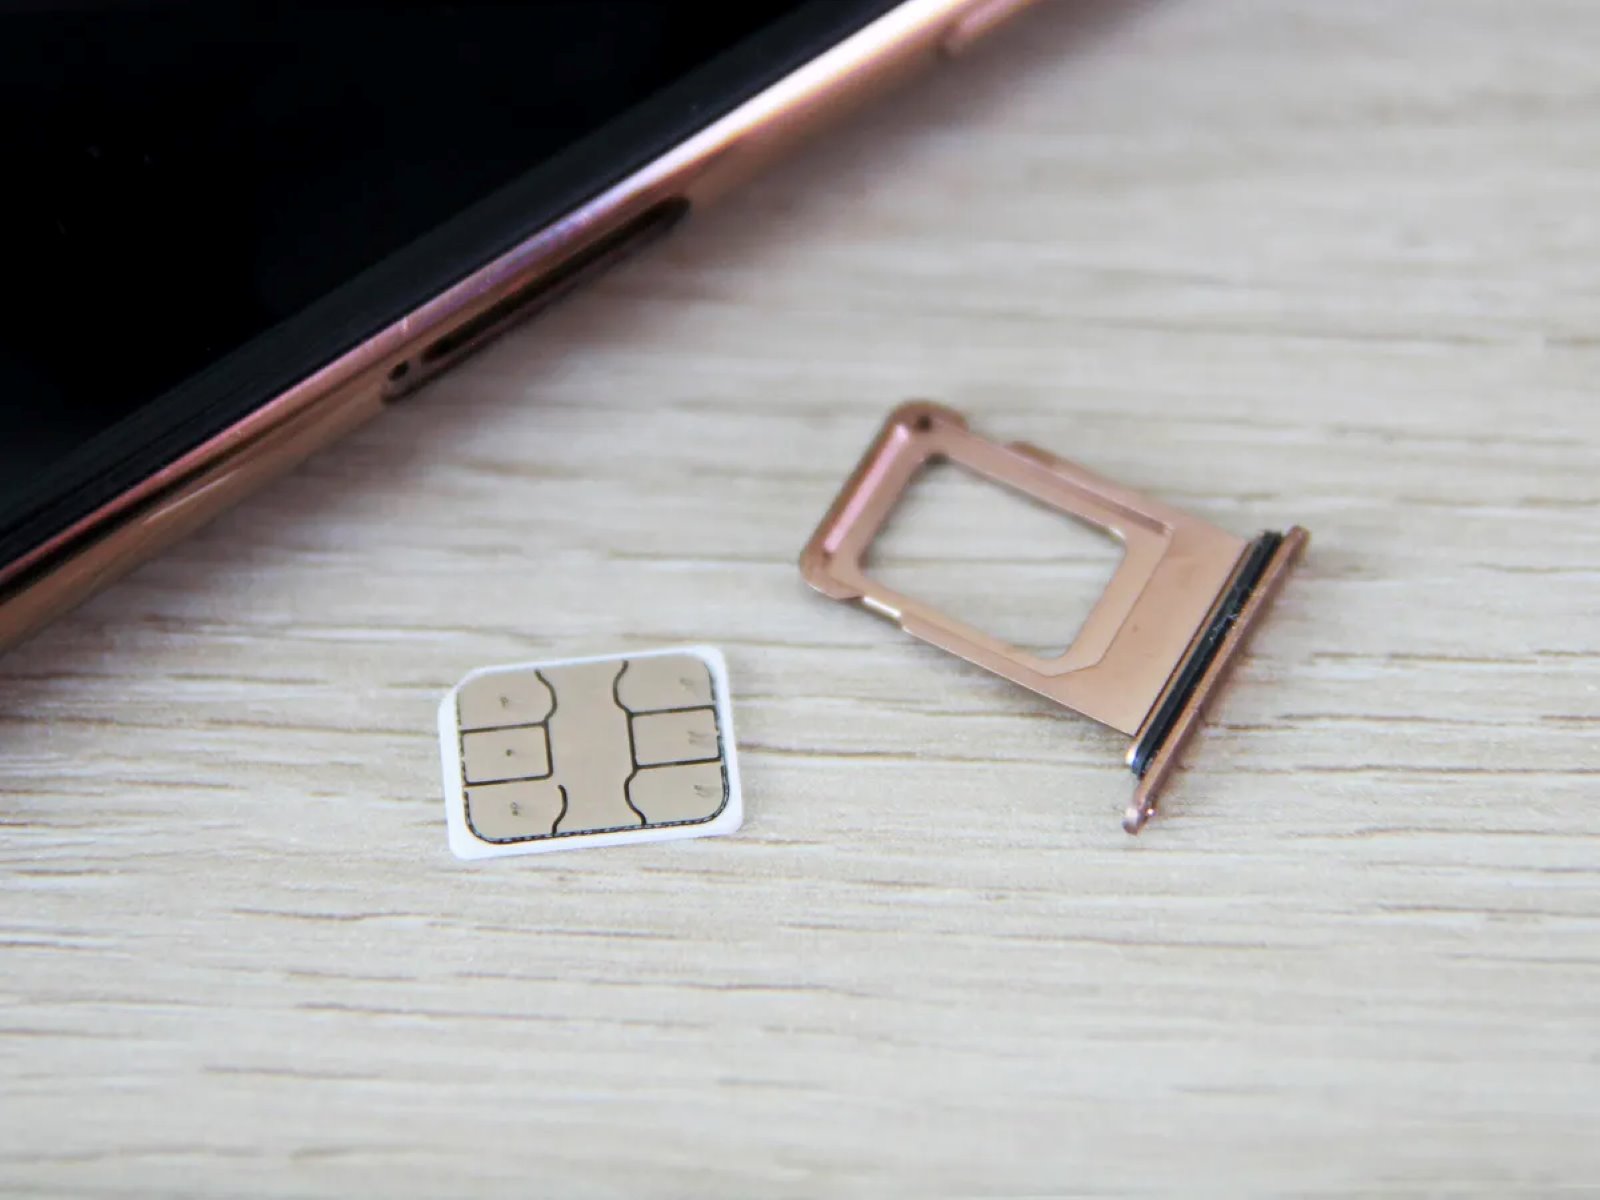 Exploring Changes When Inserting A New SIM Card